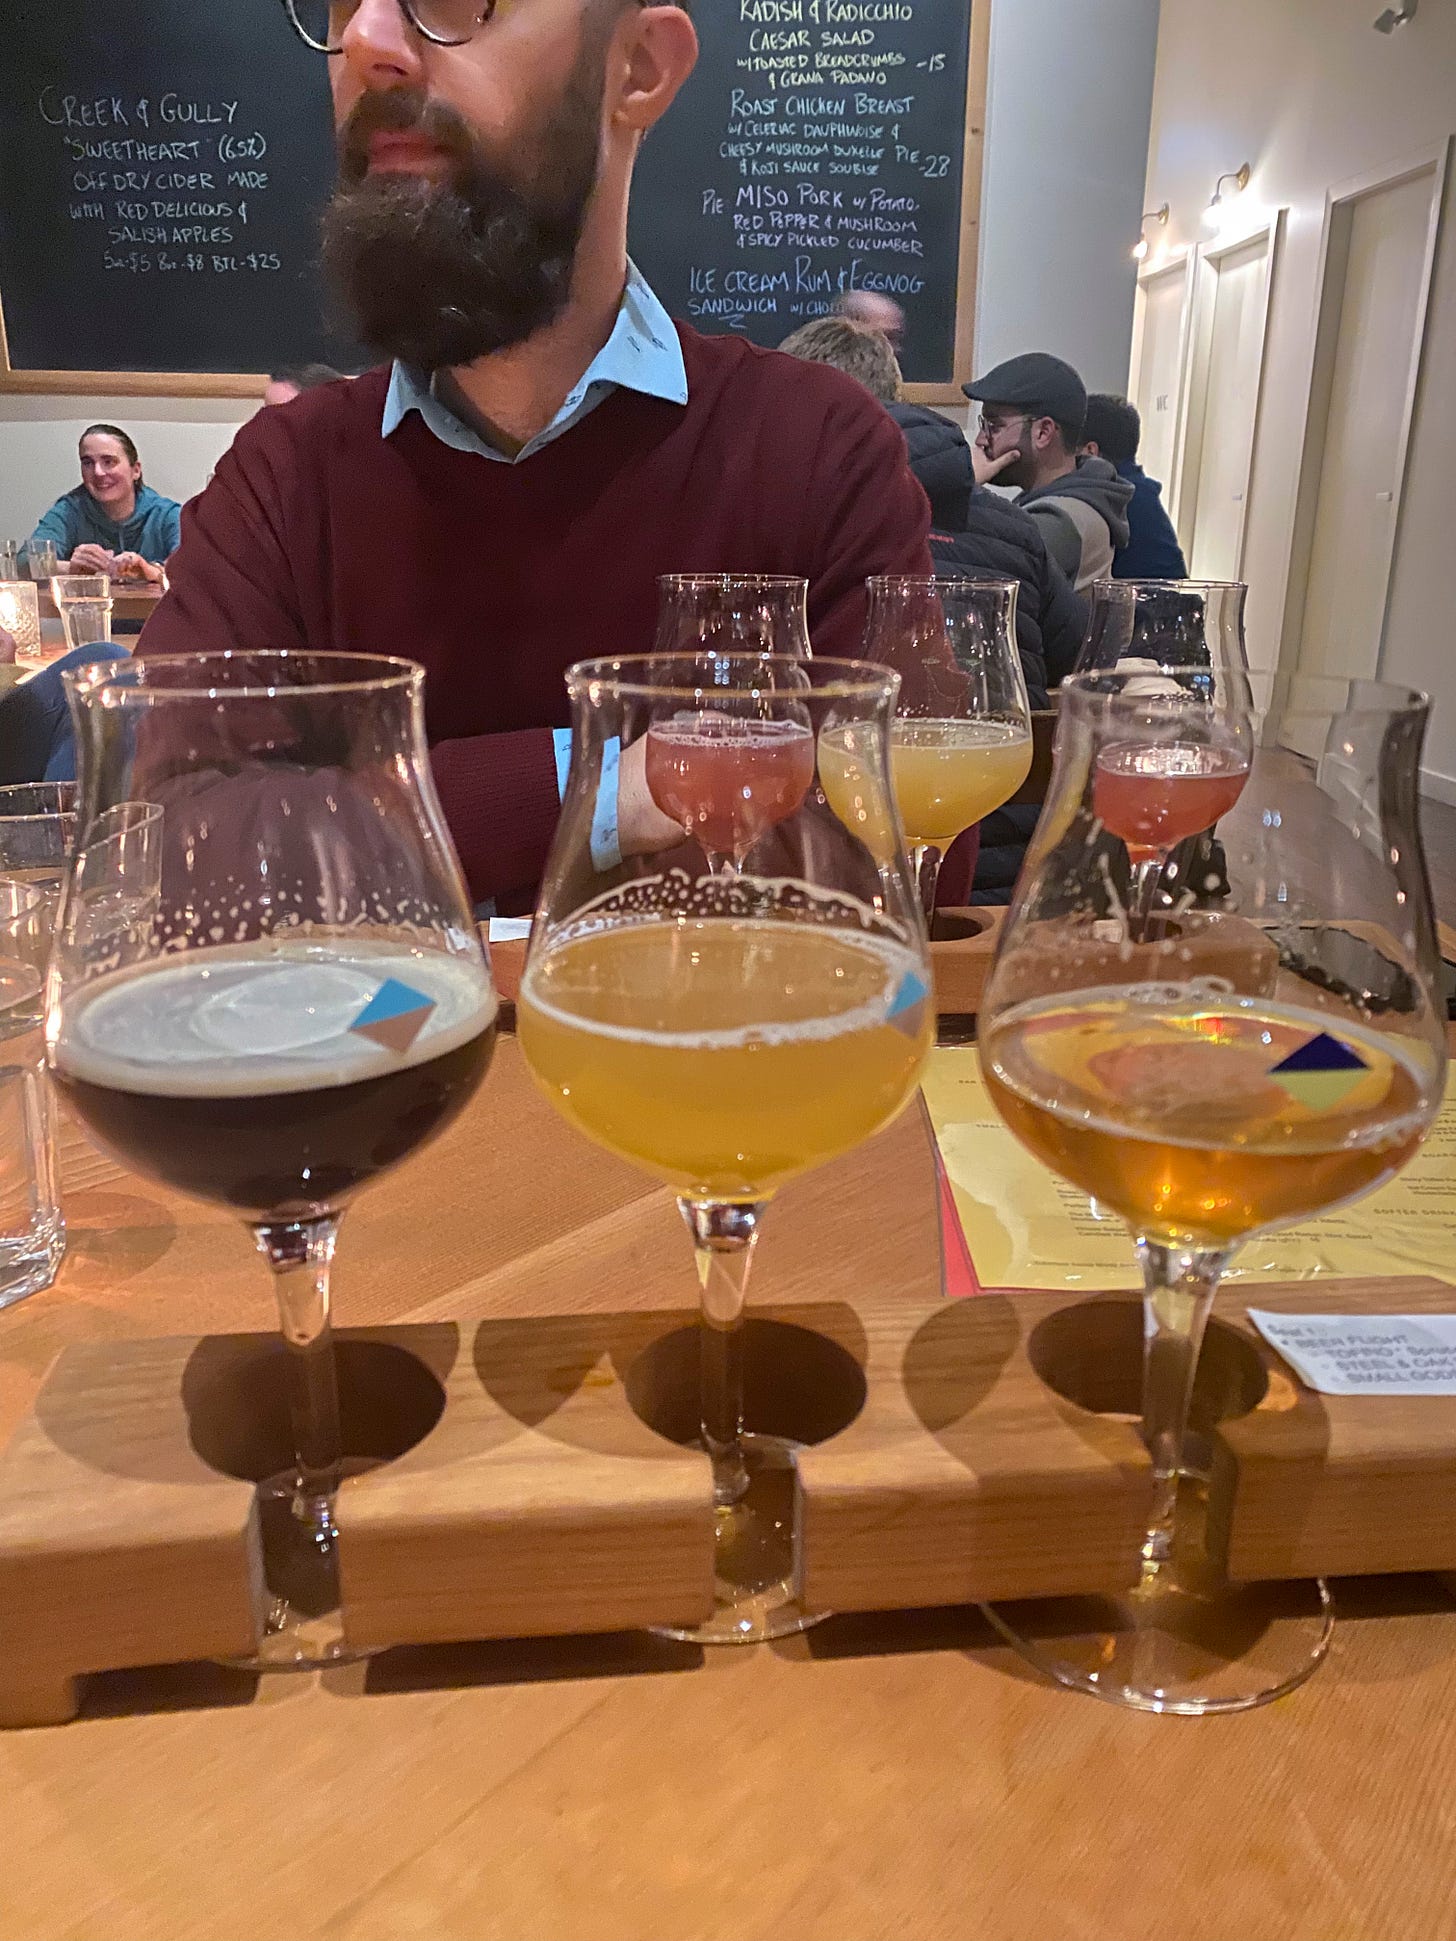 A flight of three beers in tulip glasses in the foreground, ranging from light to dark. Behind it is another flight, sitting in front of Jeff, whose face is partially visible at the top of the frame. In the background is another table of people, and a blackboard of specials on the wall.